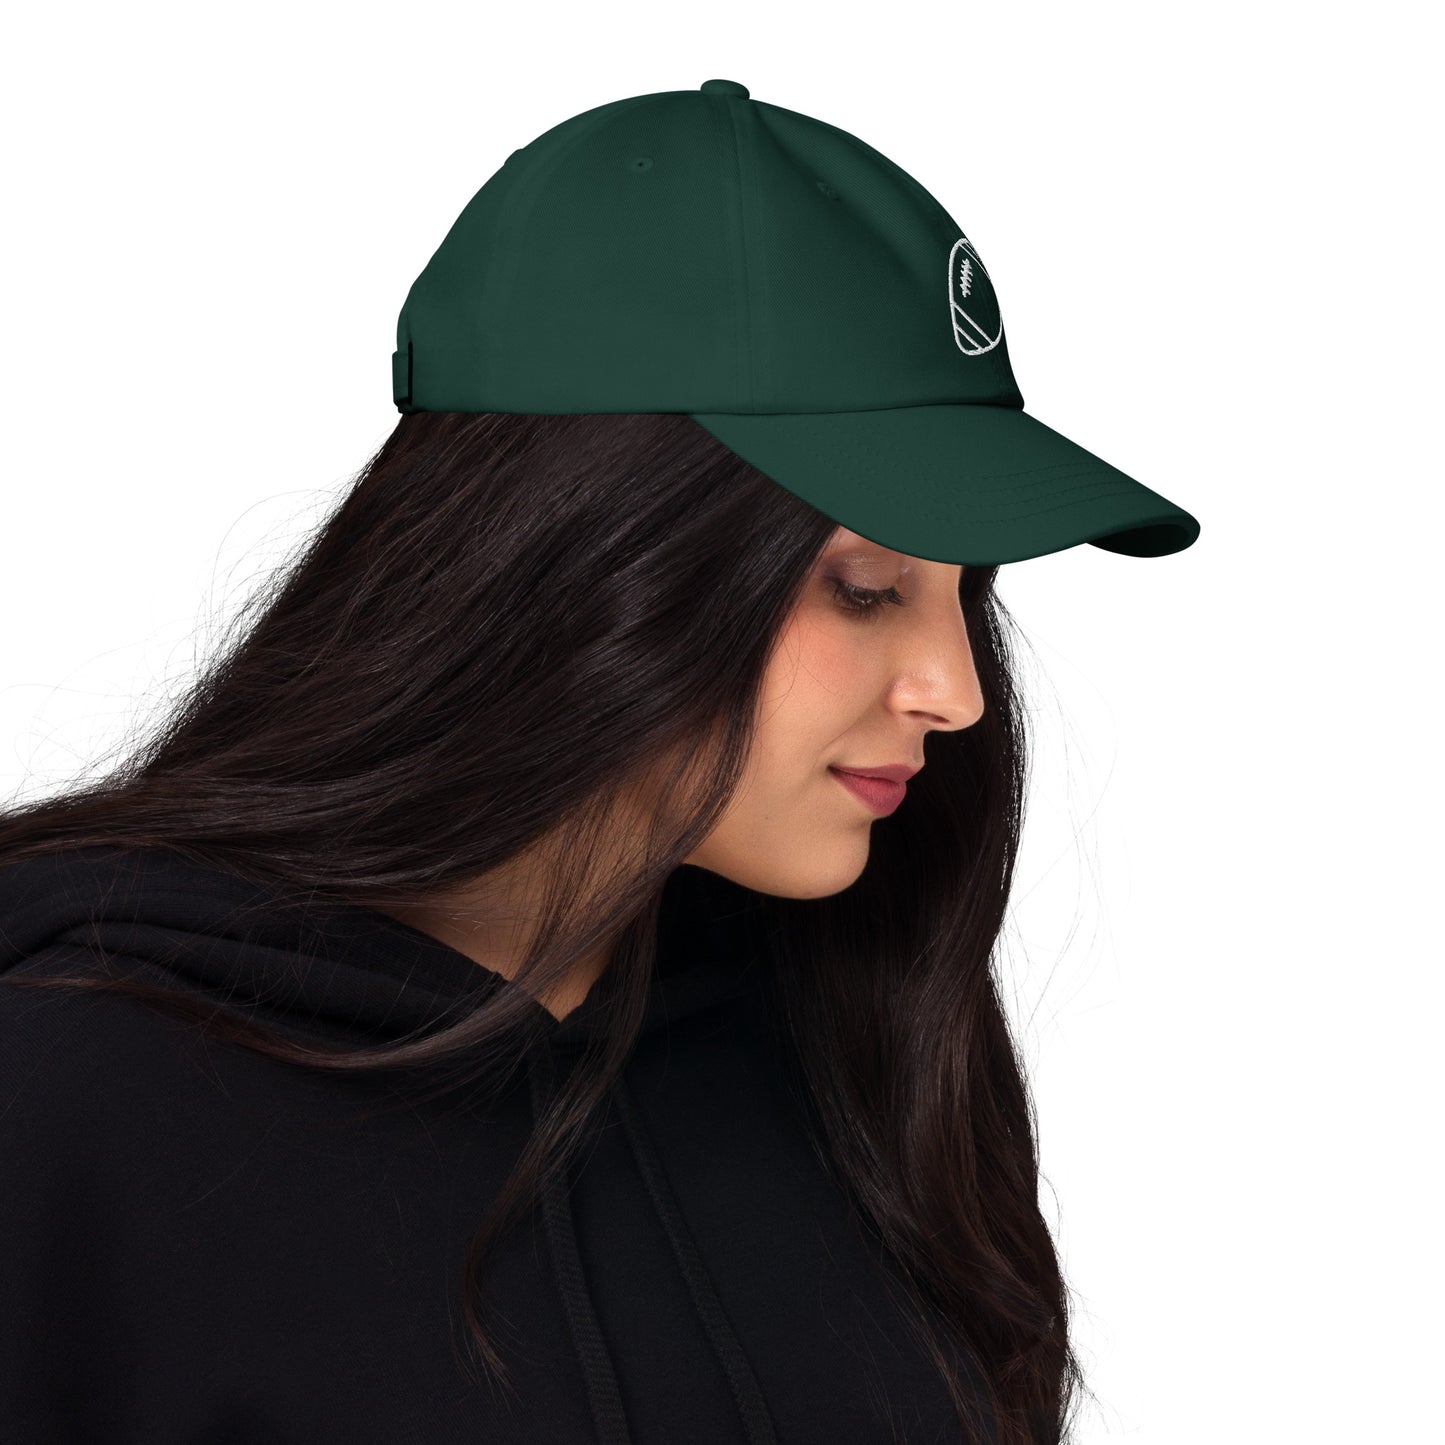 women with green baseball cap with football